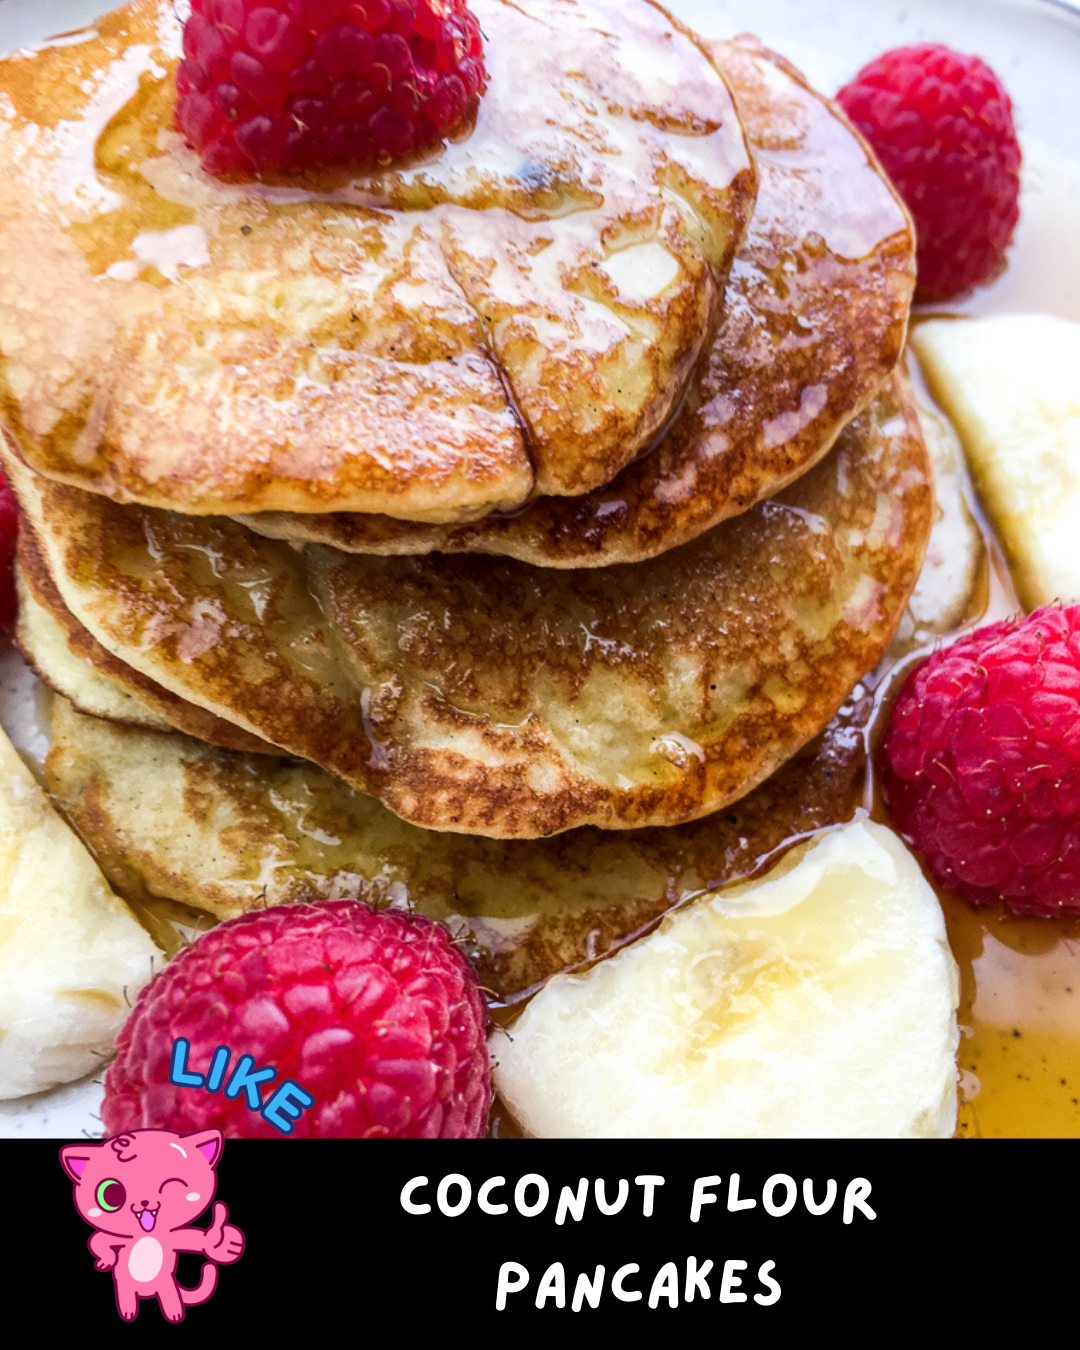 Wake up to a stack of dreamy, fluffy coconut flour pancakes! 🥞🌴 Packed with coconutty goodness, these pancakes are light, delicious, and perfect for any breakfast lover. Treat yourself to a delightful morning meal that’s both easy to make and irresistibly tasty. 😍🥥 #MorningMagic #PancakeHeaven